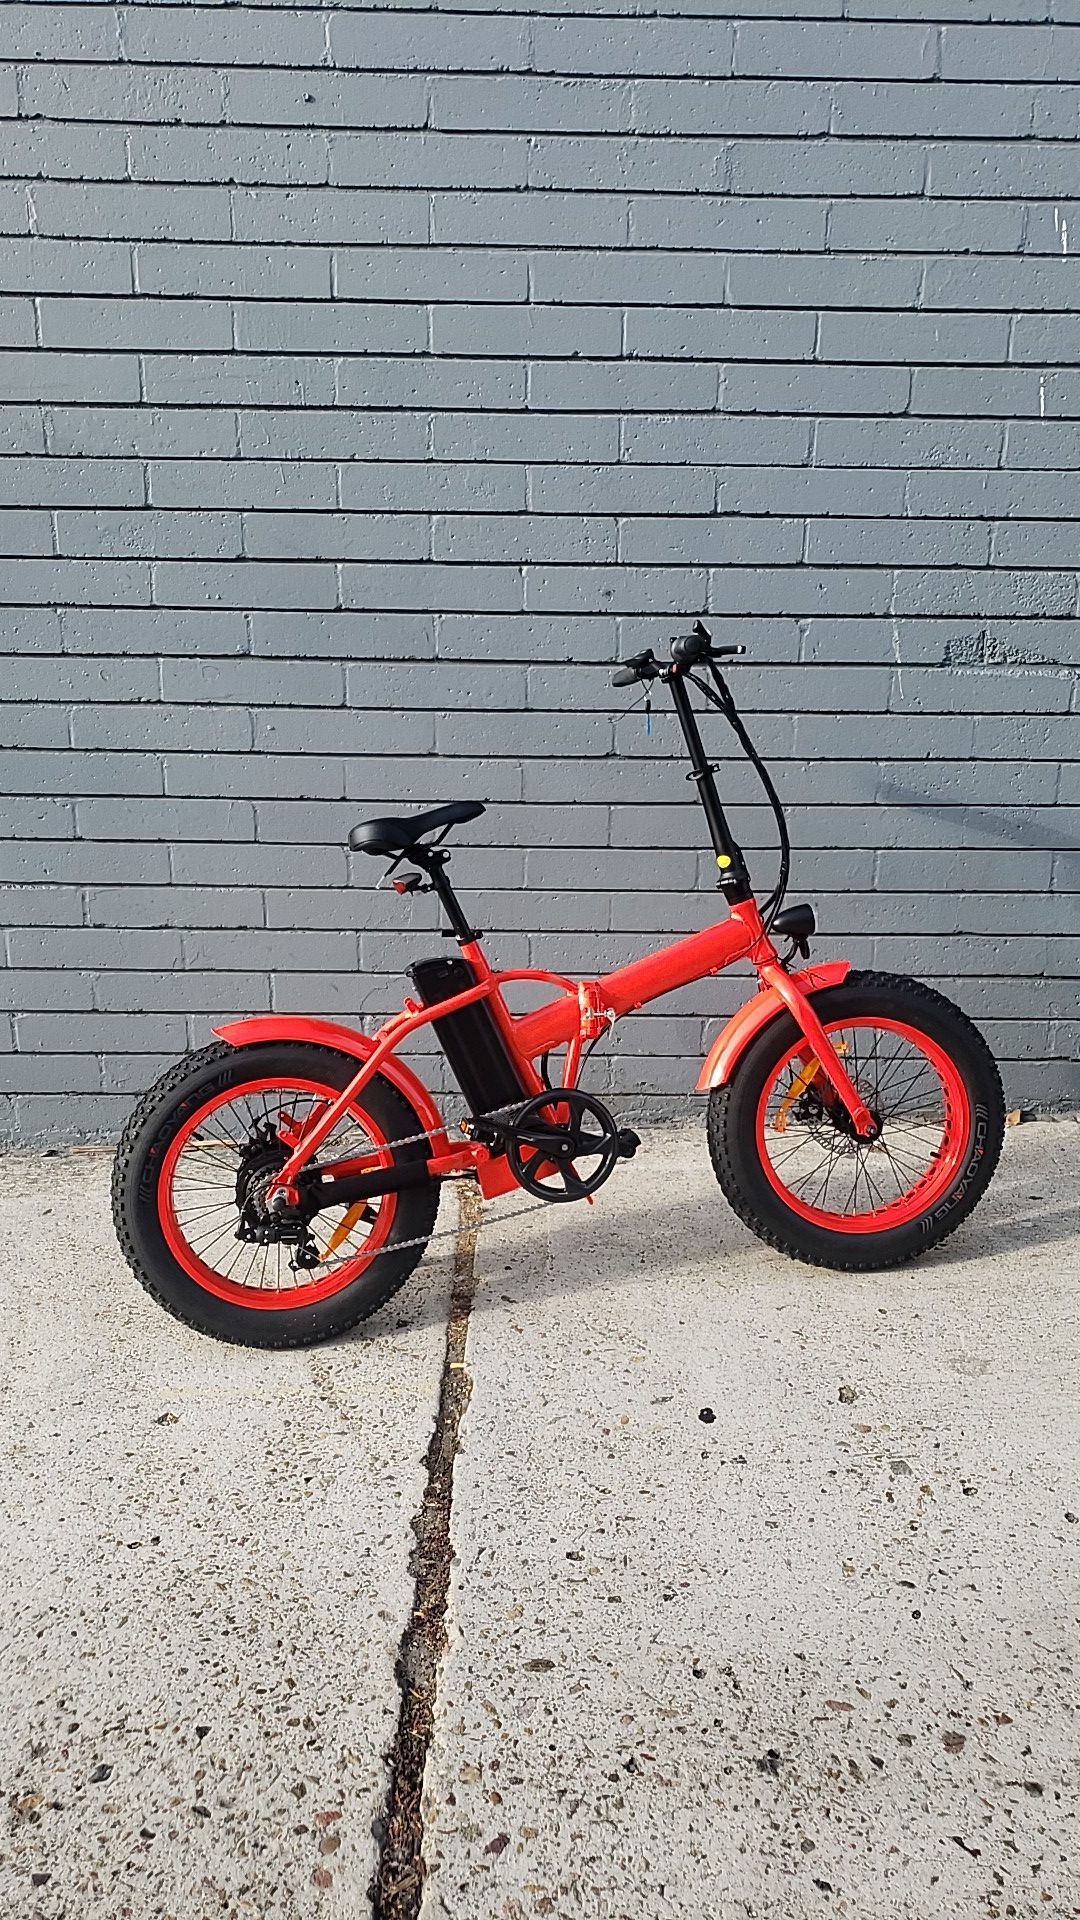 NEW Electric Bicycle "TJC" Duckies